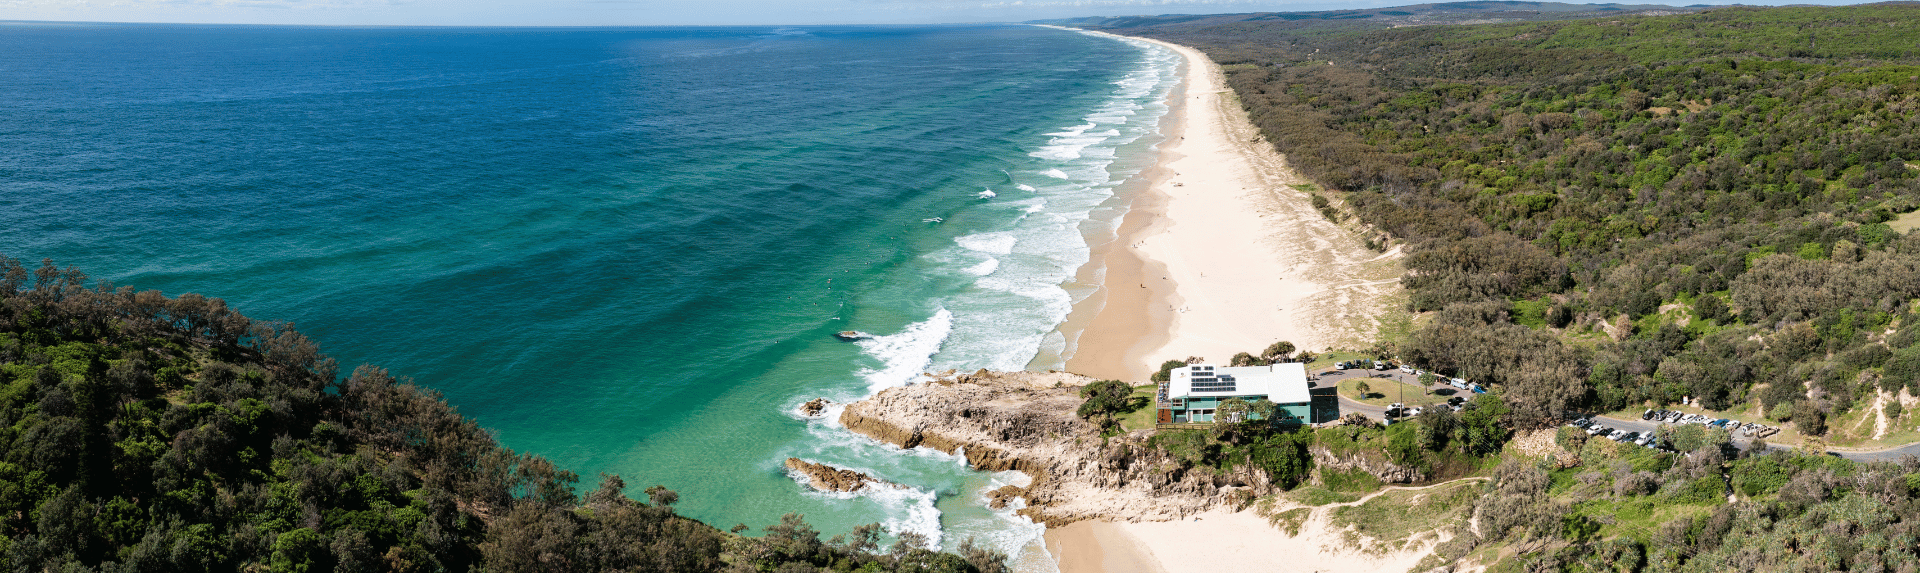 Top 3 Day Trips From Brisbane